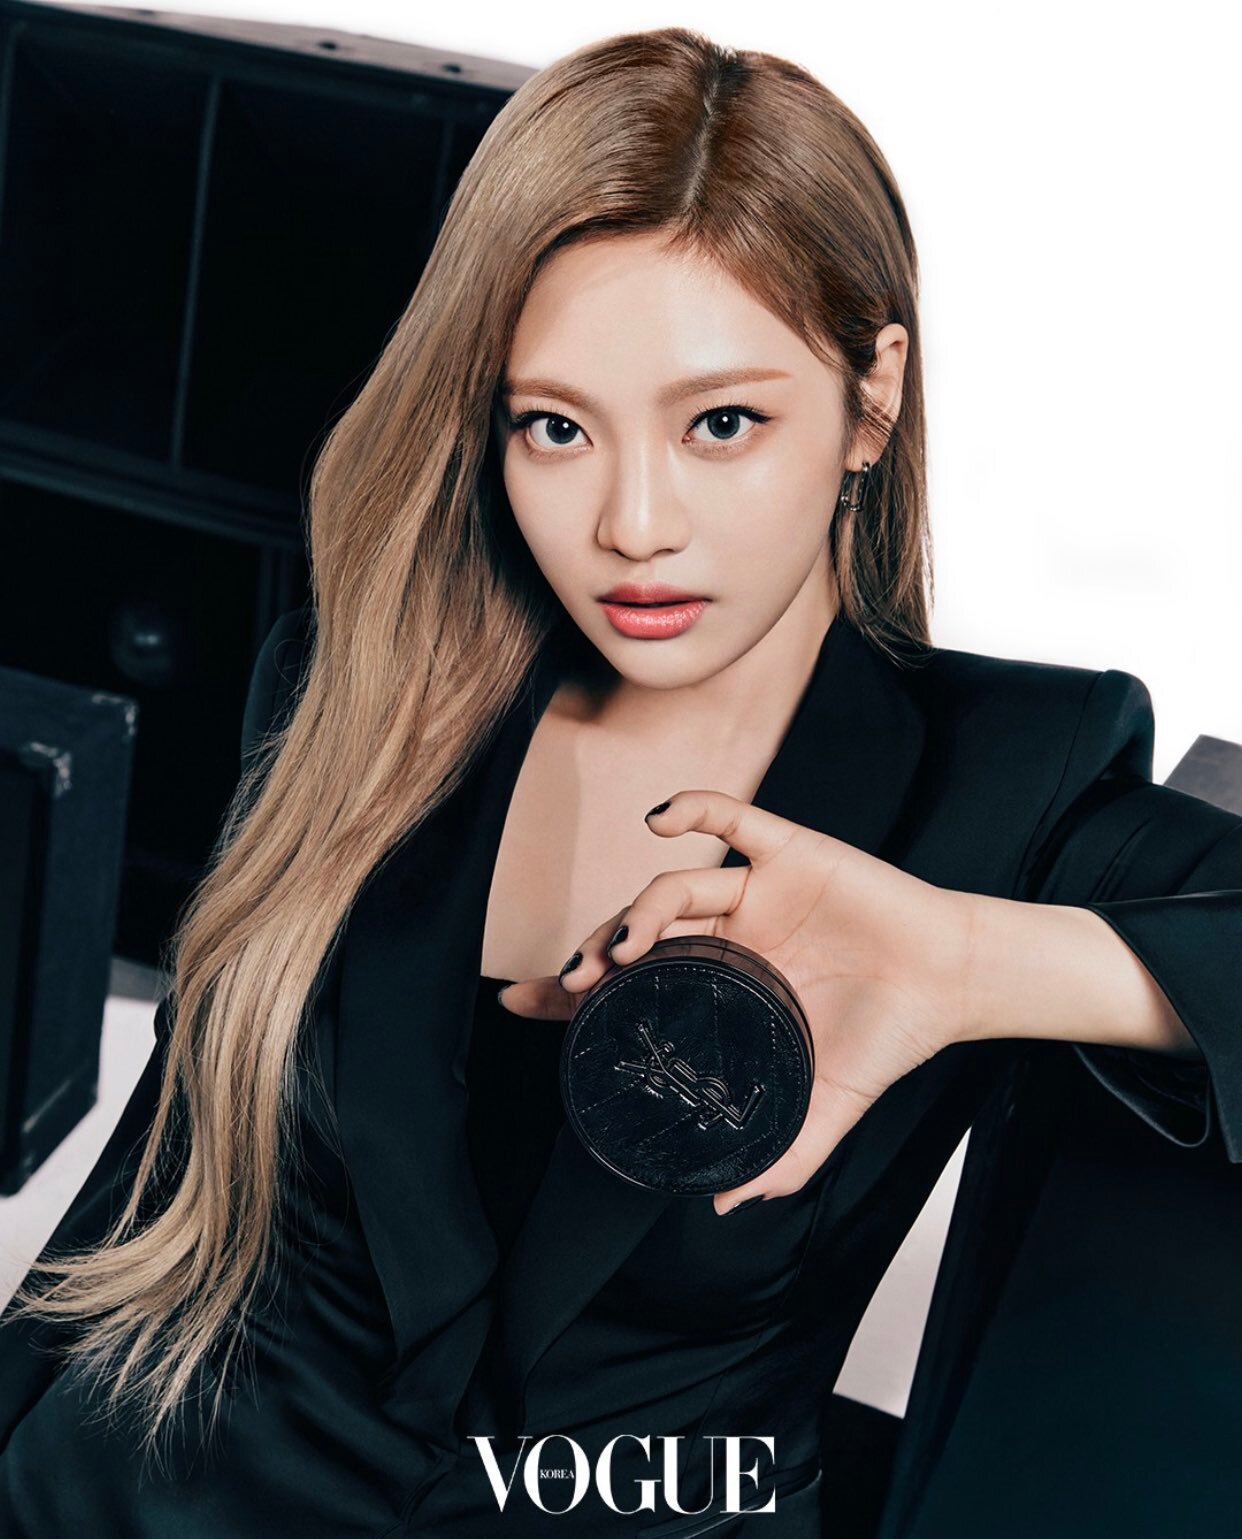 ⋆˙ on X: so is aespa a ysl brand ambassador now or what   / X